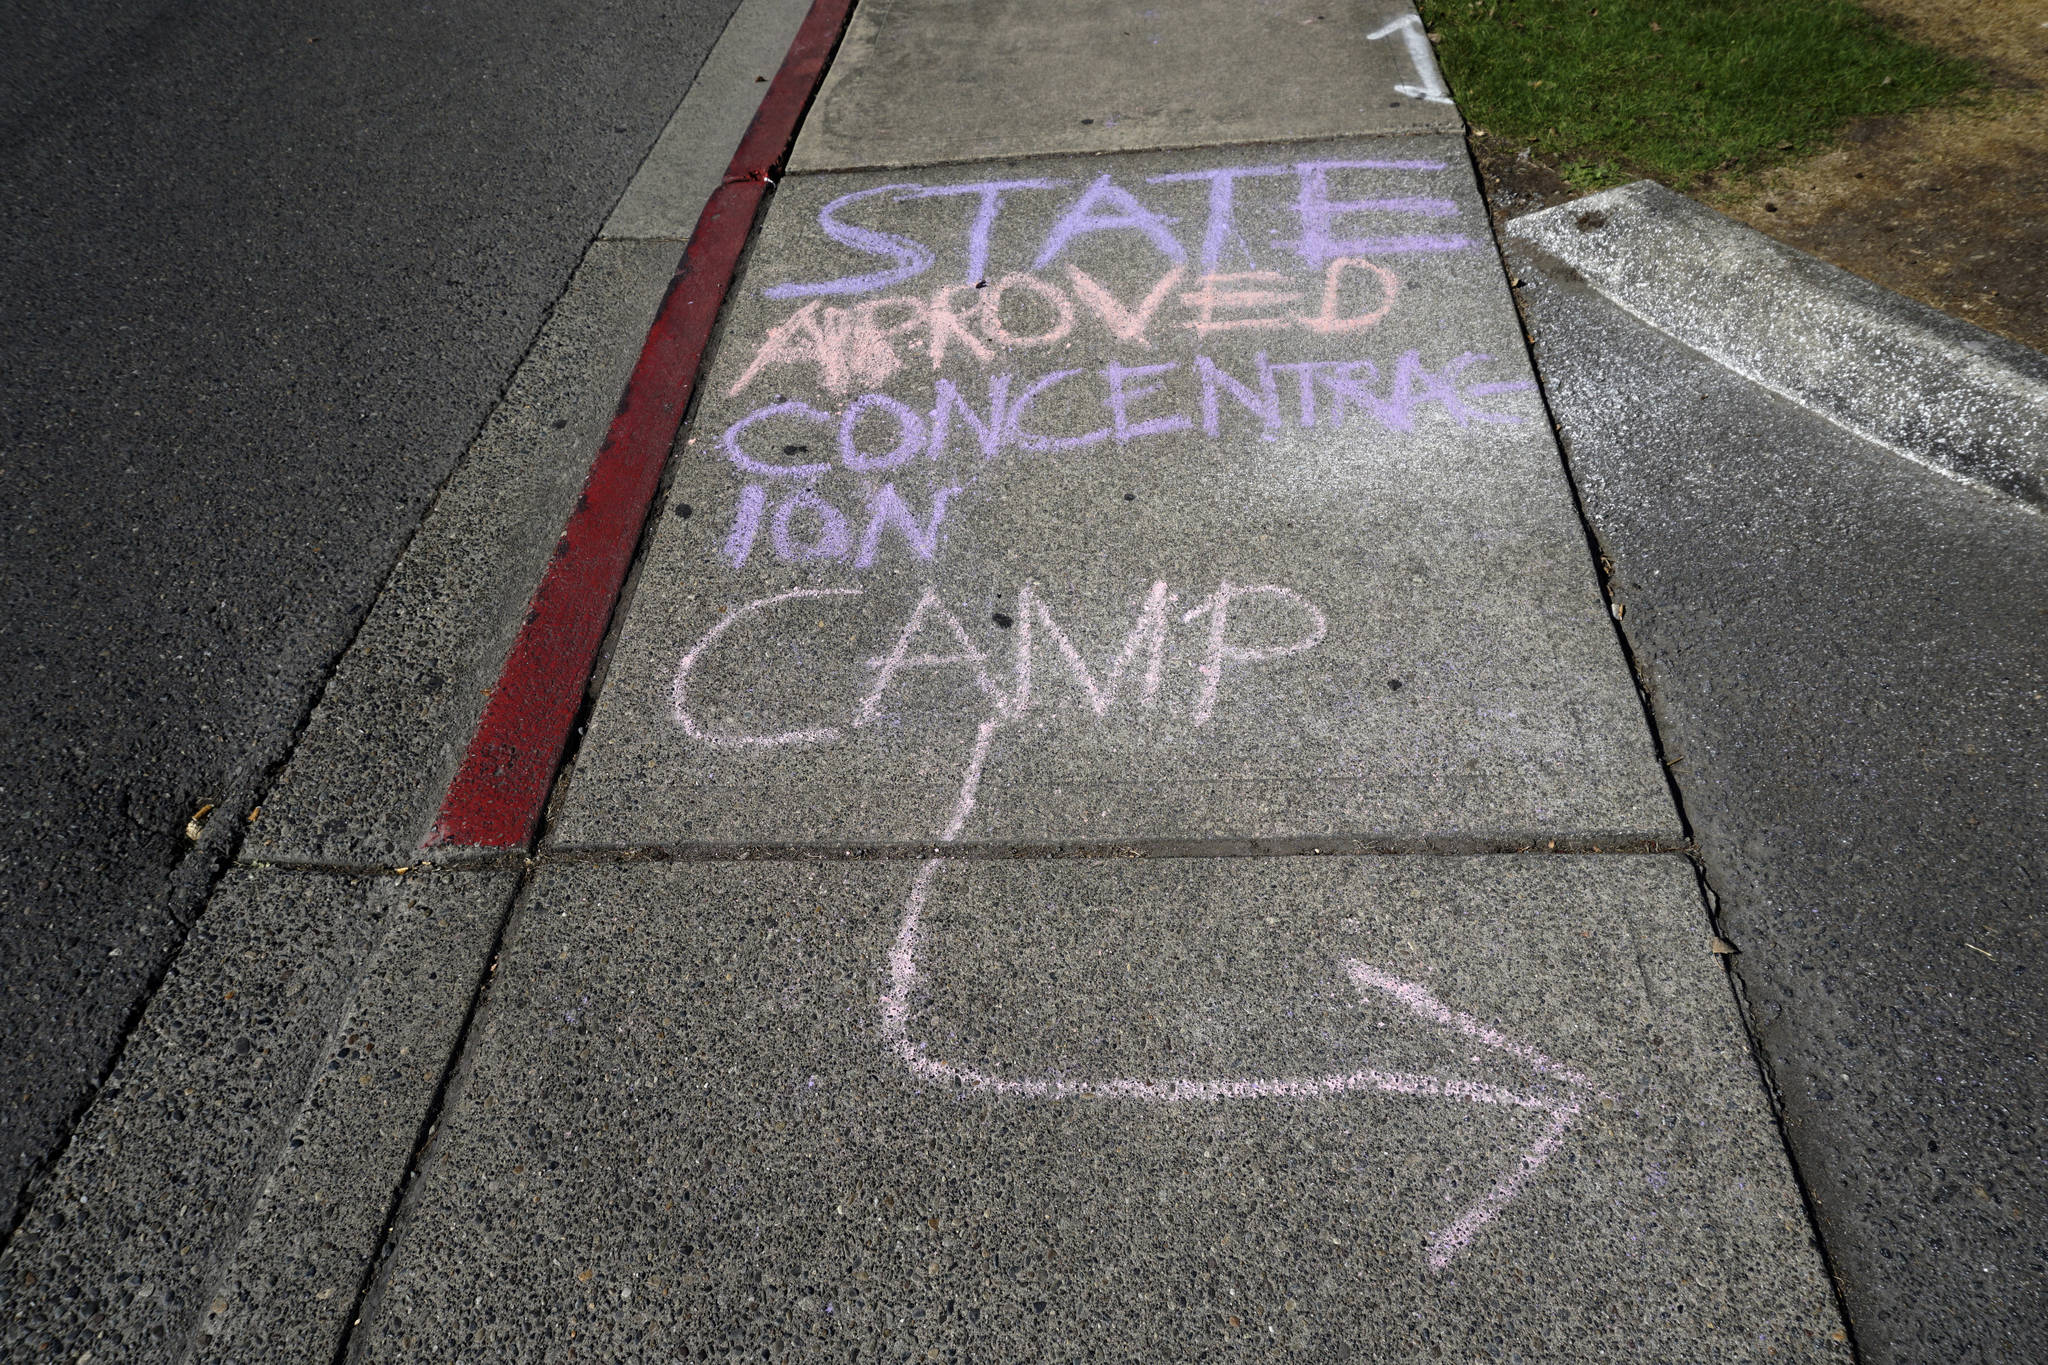 Demonstrators wrote messages on the sidewalk leading to the NWDC on Sep. 1. Photo by Melissa Hellmann